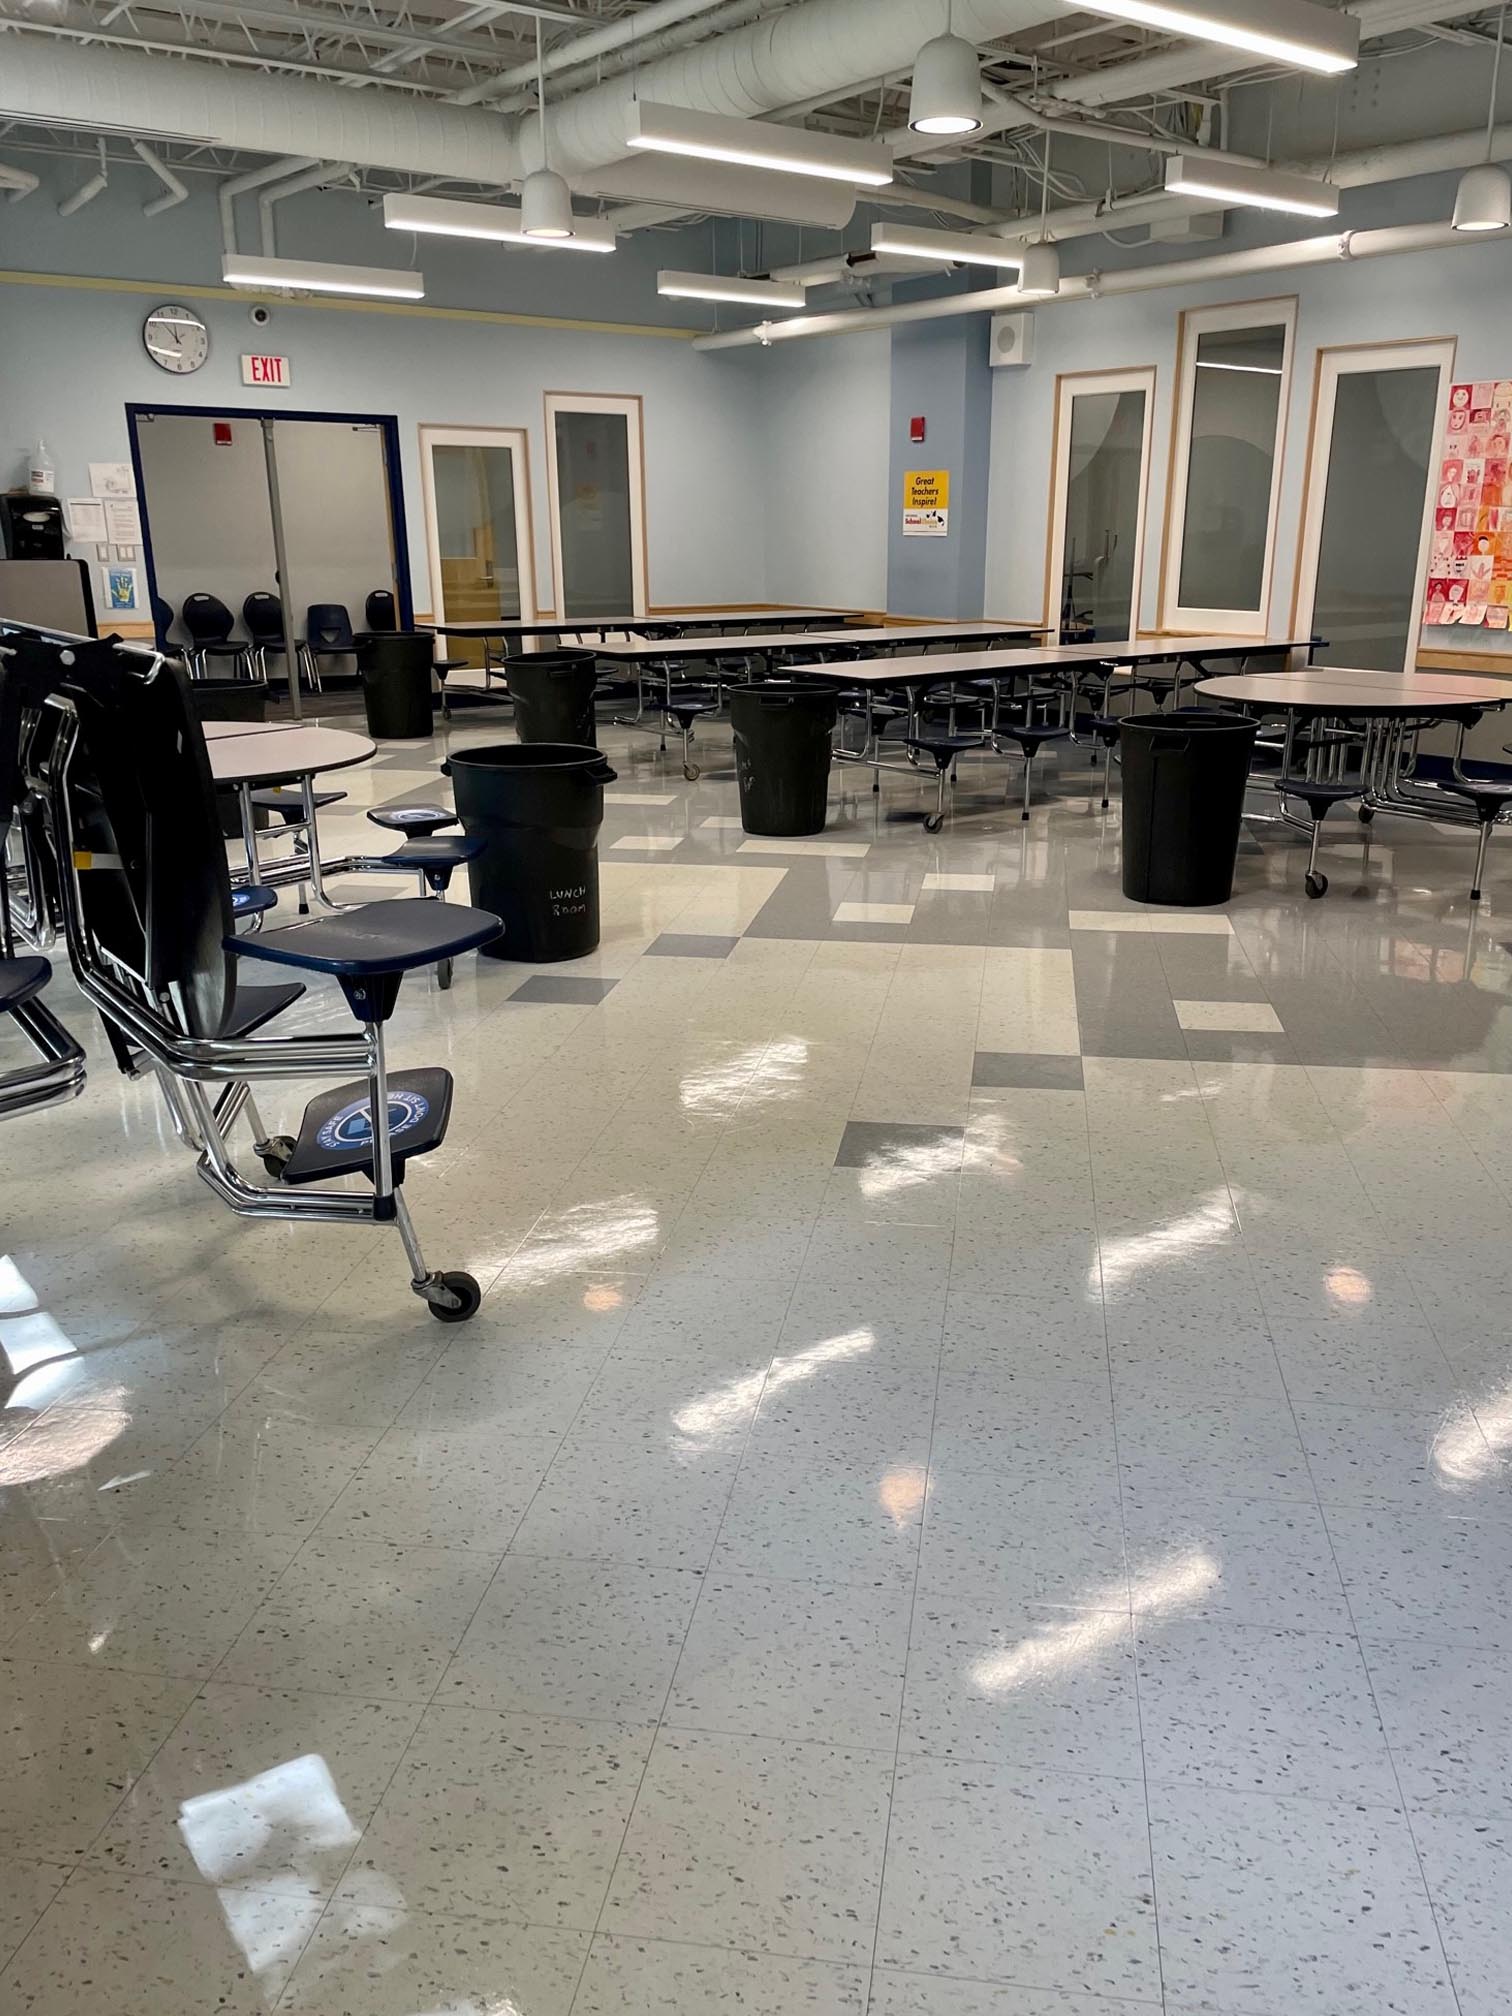 Cafeteria cleaning service in Massachusetts